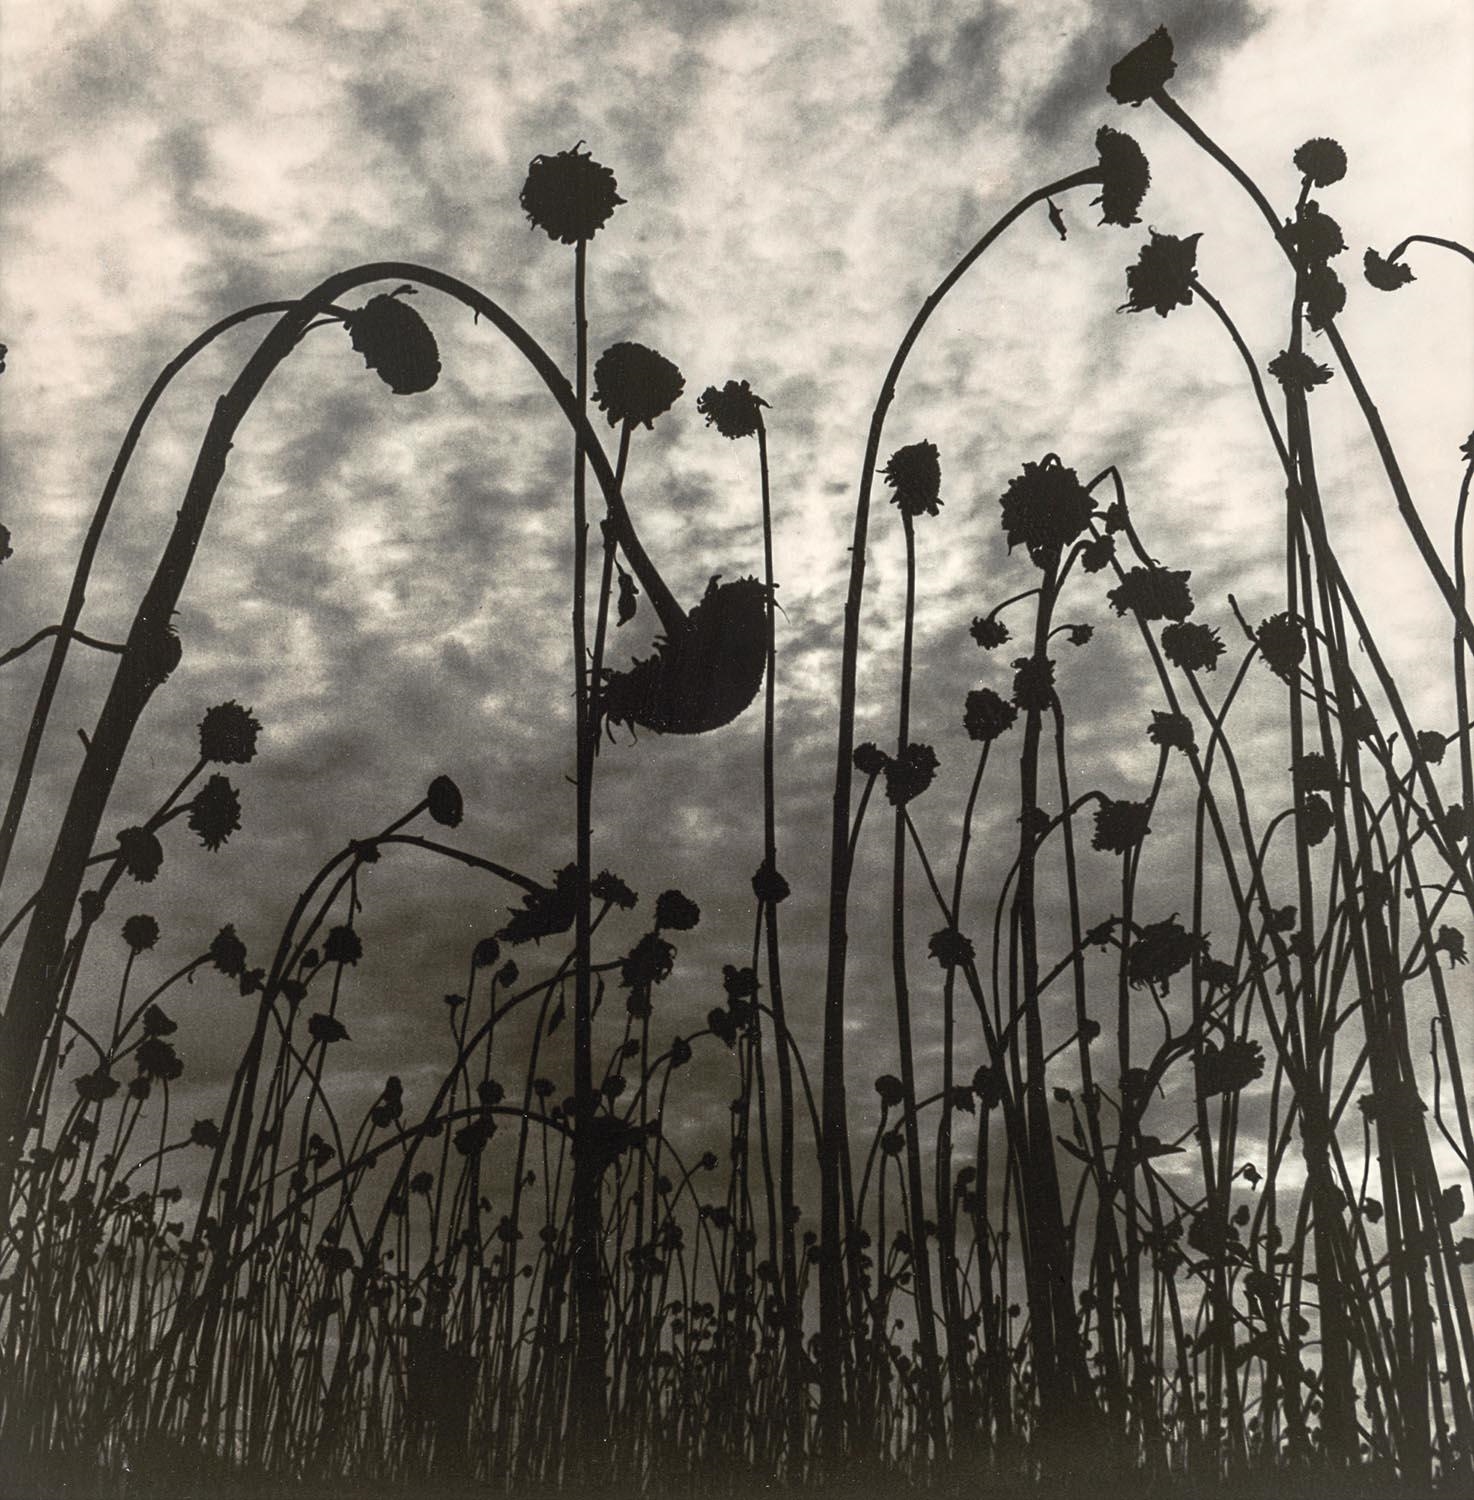 Artwork by Olive Cotton, Dead Sunflowers, Made of silver gelatin photograph